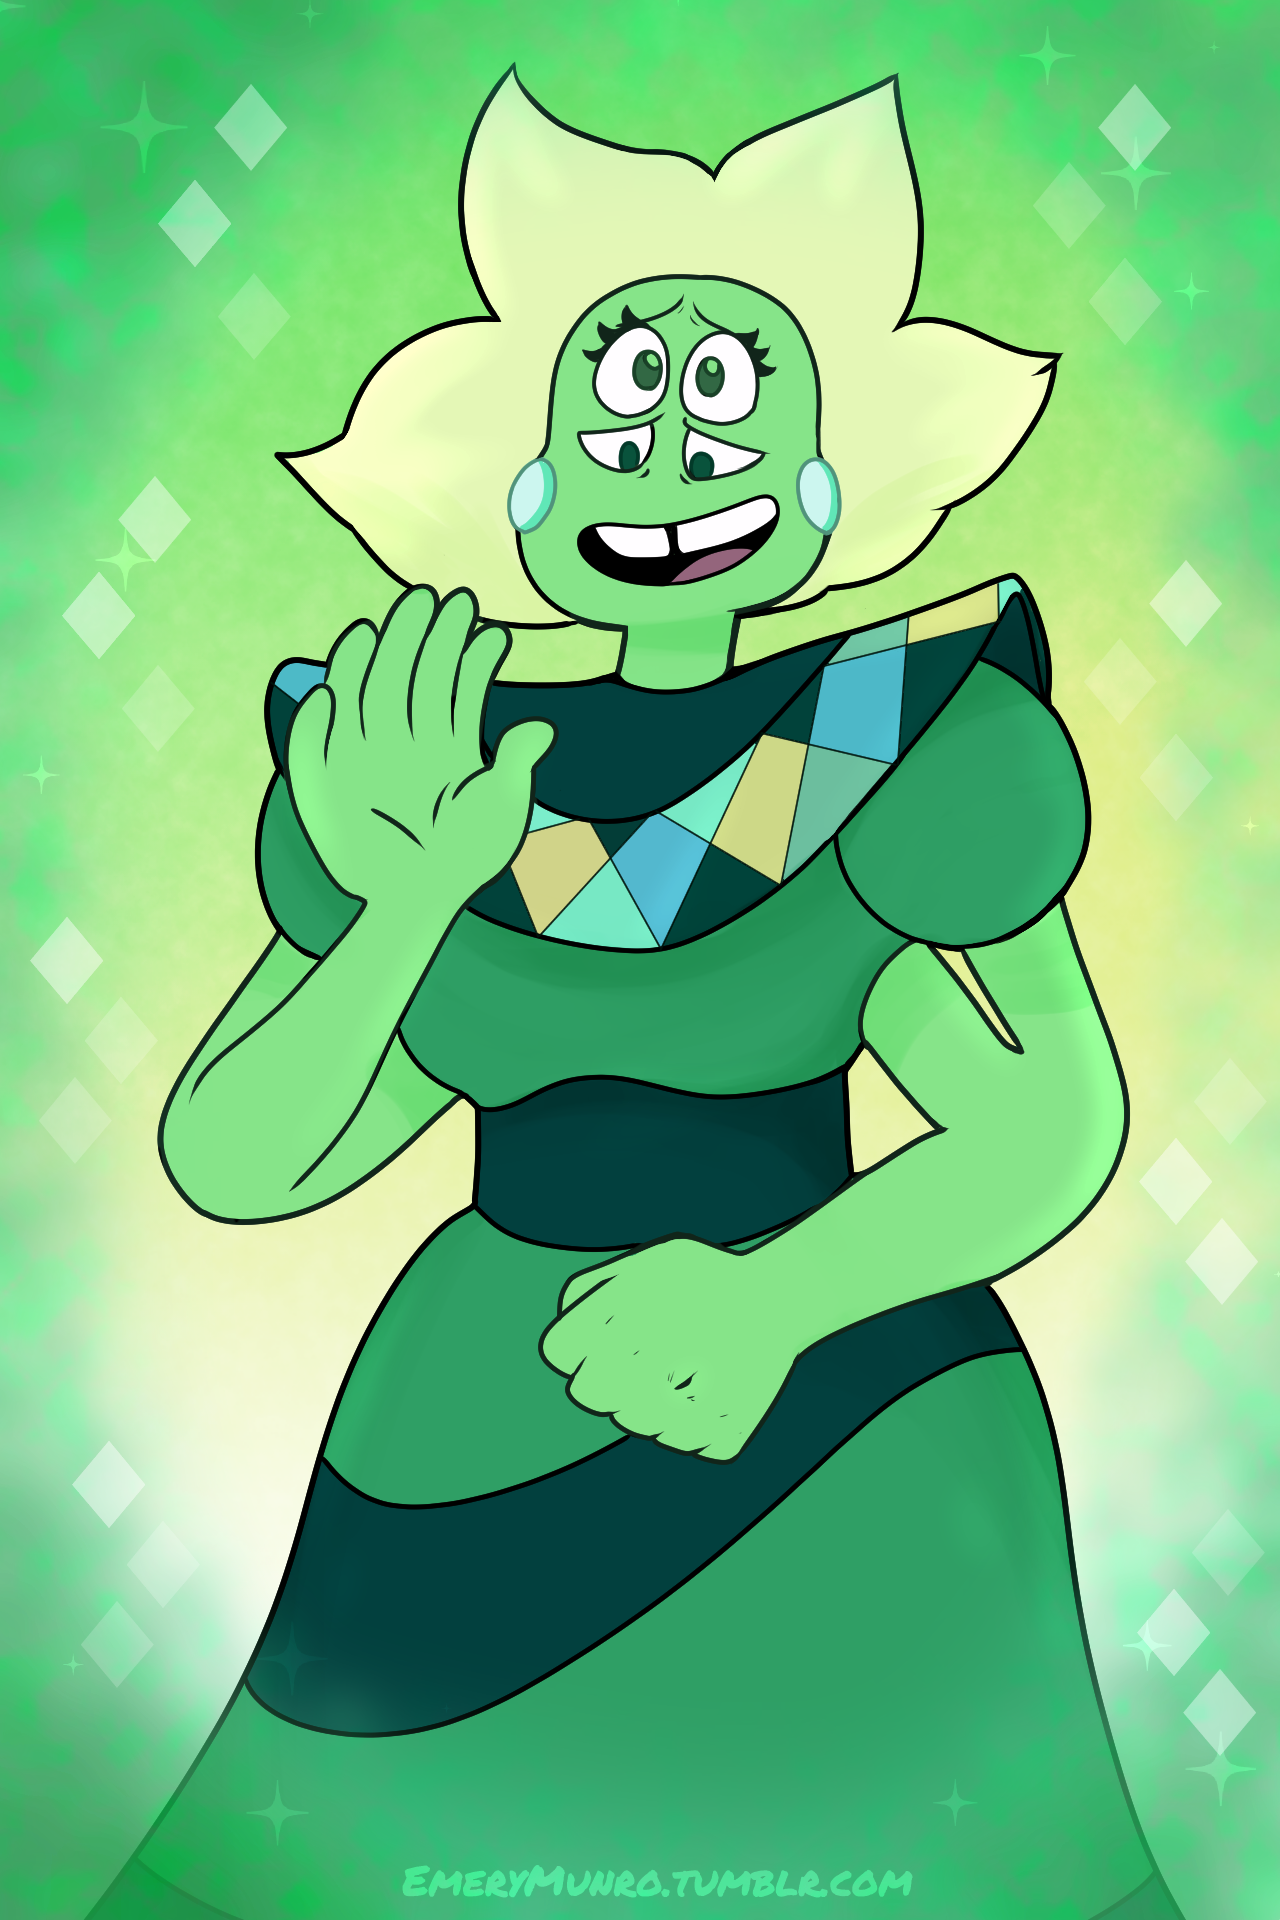 Y’all know me, her design is EXACTLY what I’m all about 💚 💚 💚